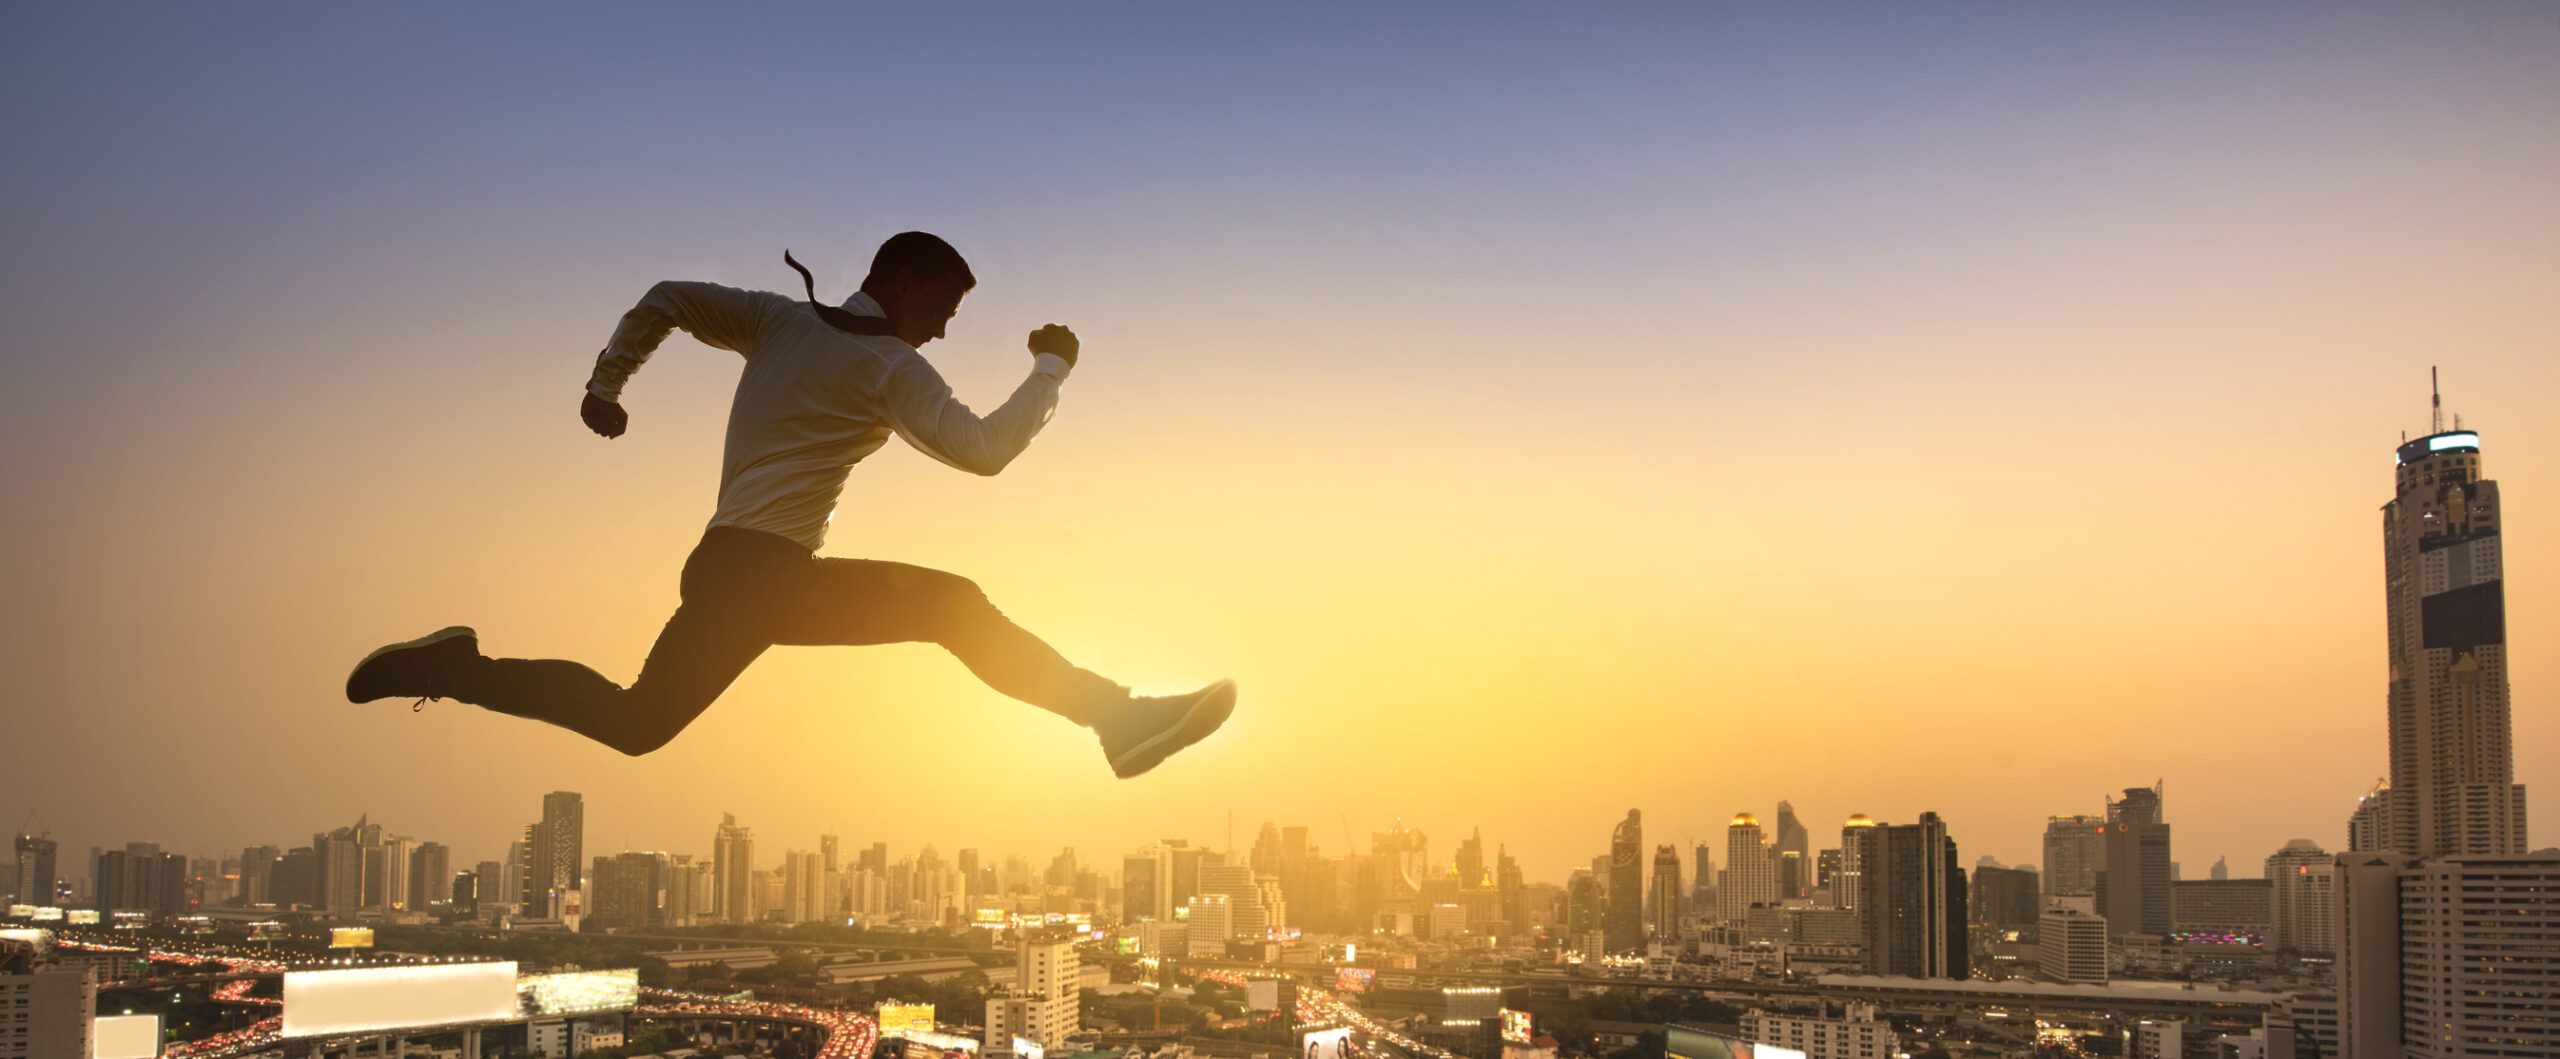 man jumping high with cityscape background